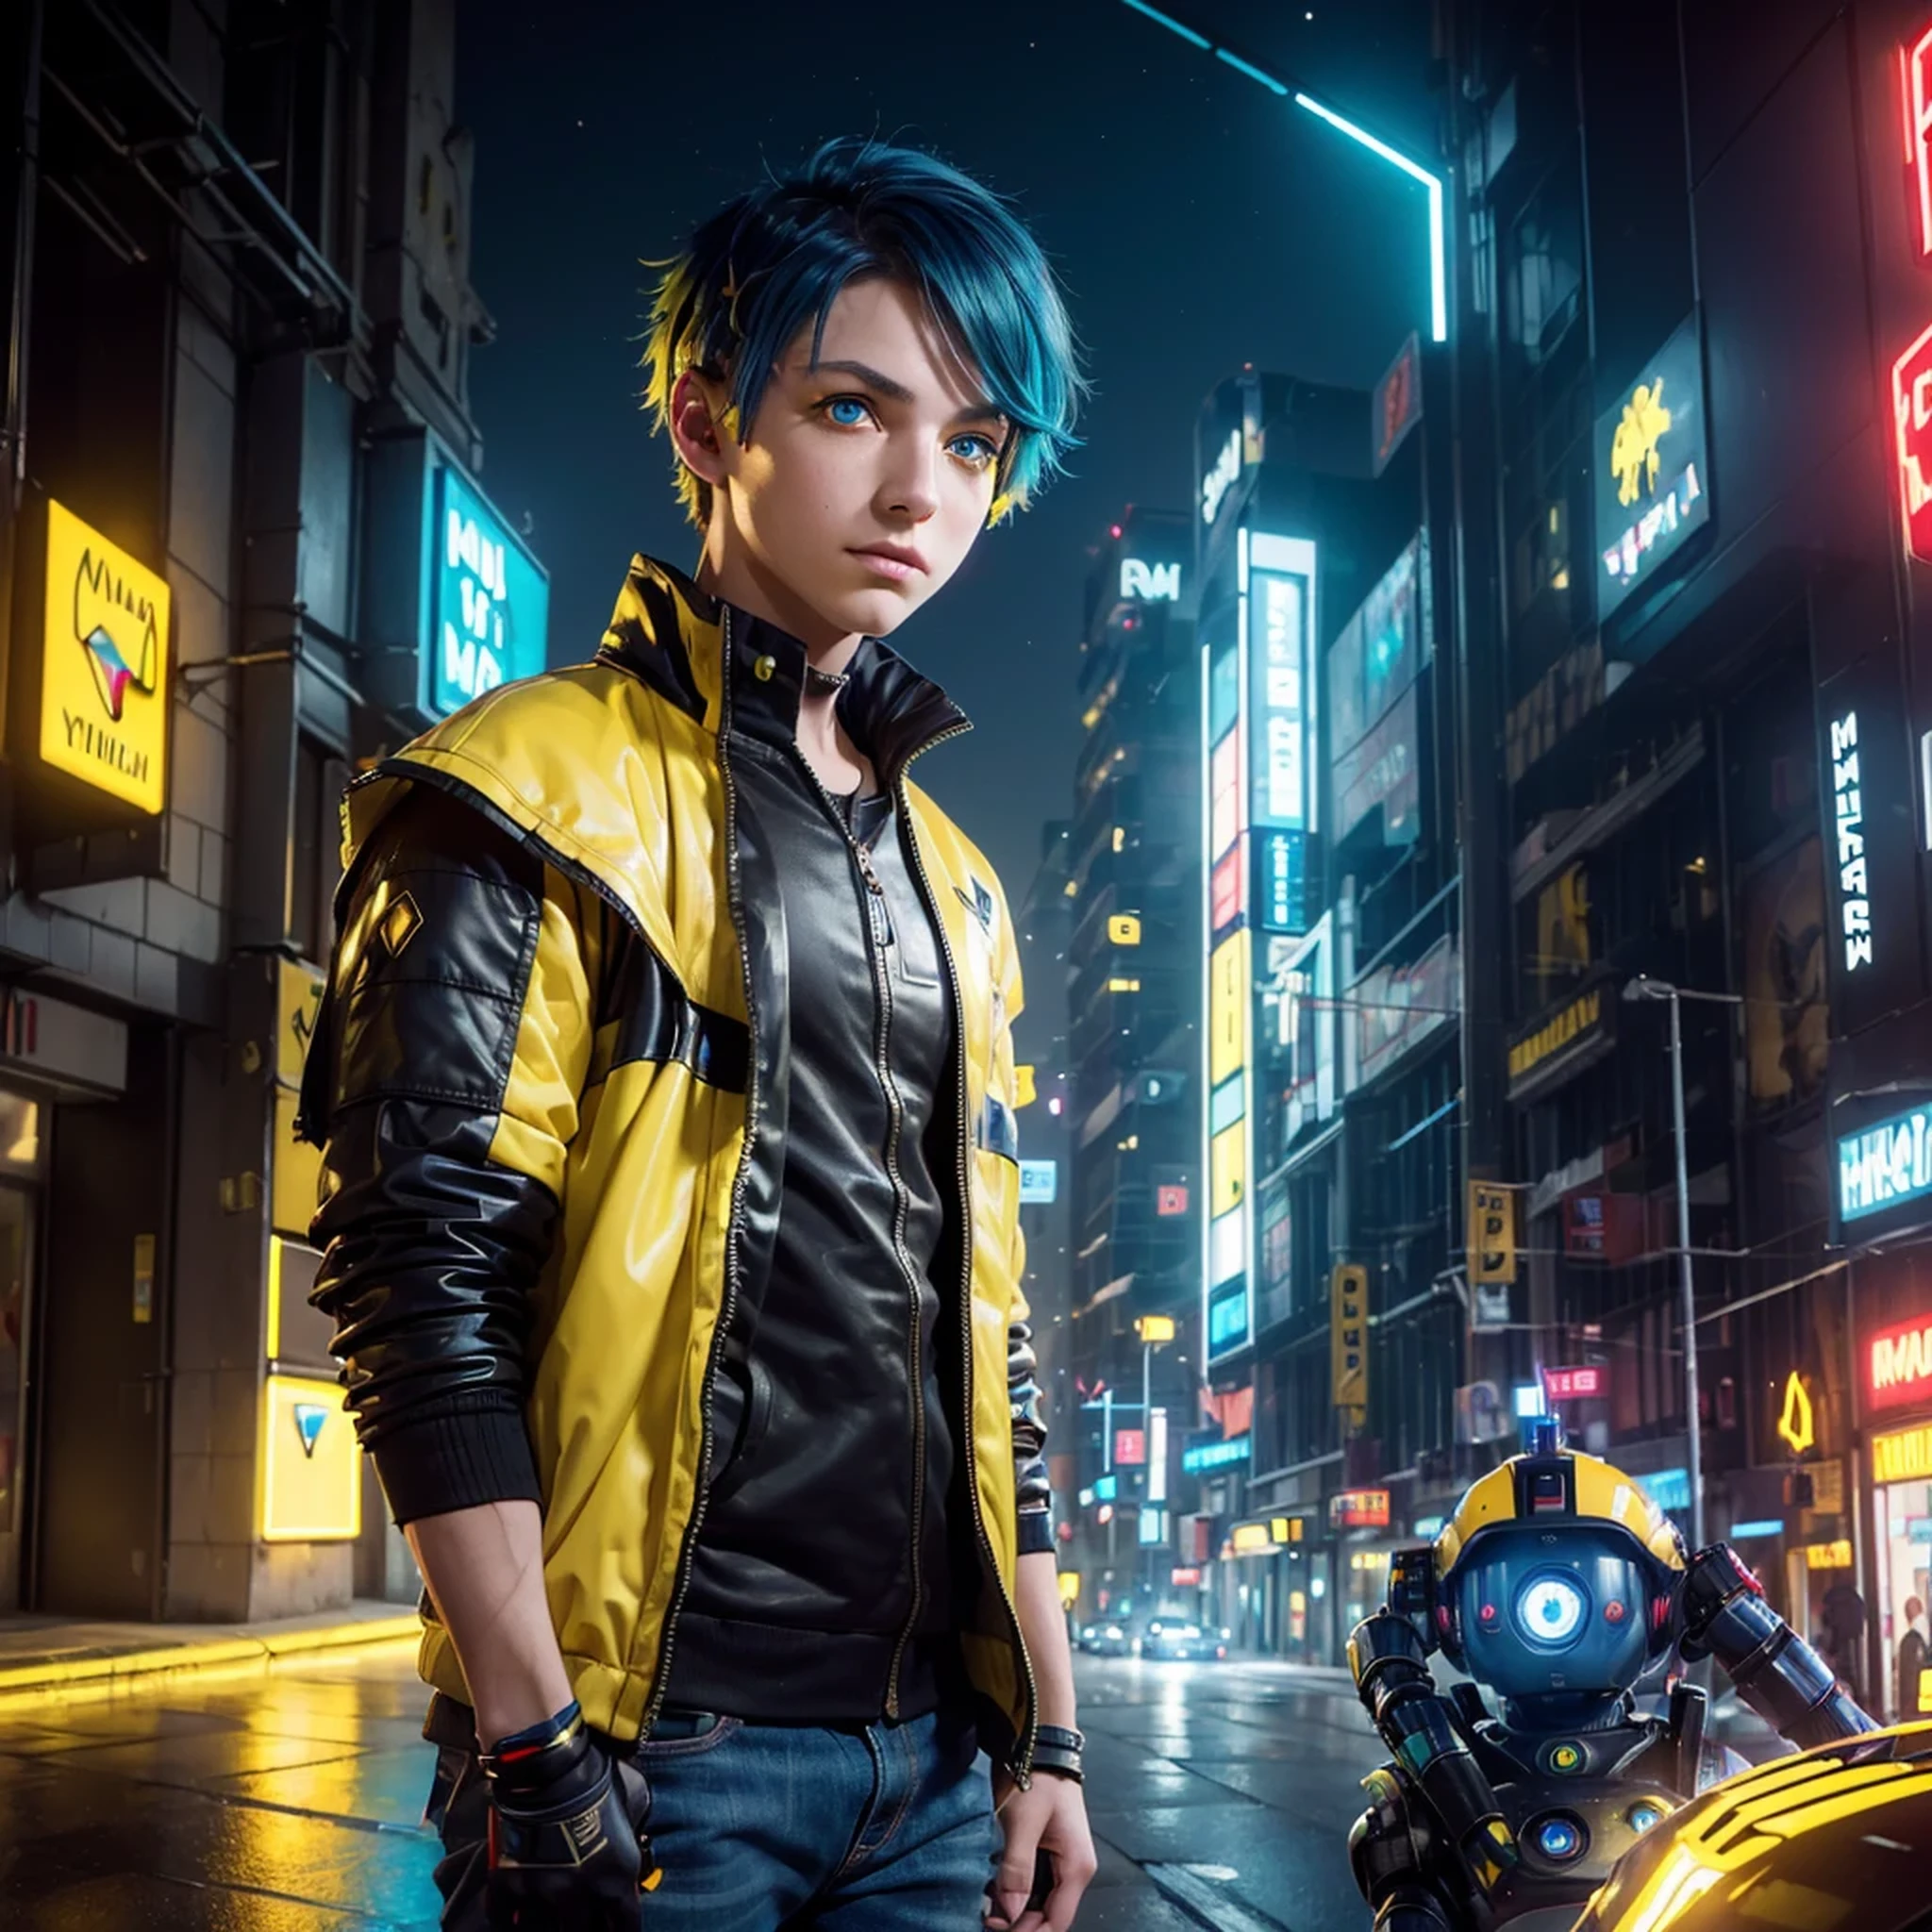 (masterpiece:1.3), (best cinematic quality:1.2), (extremely detailed setting:1), (soft+artistic lighting), (1boy), short blue haired, (eyes+yellow+red:1.4), (multicolored eyes+heterochromia), wearing cyberpunk clothes, futuristic, technological, city scenery with (robots around)0.4], giving dramatic scenery.